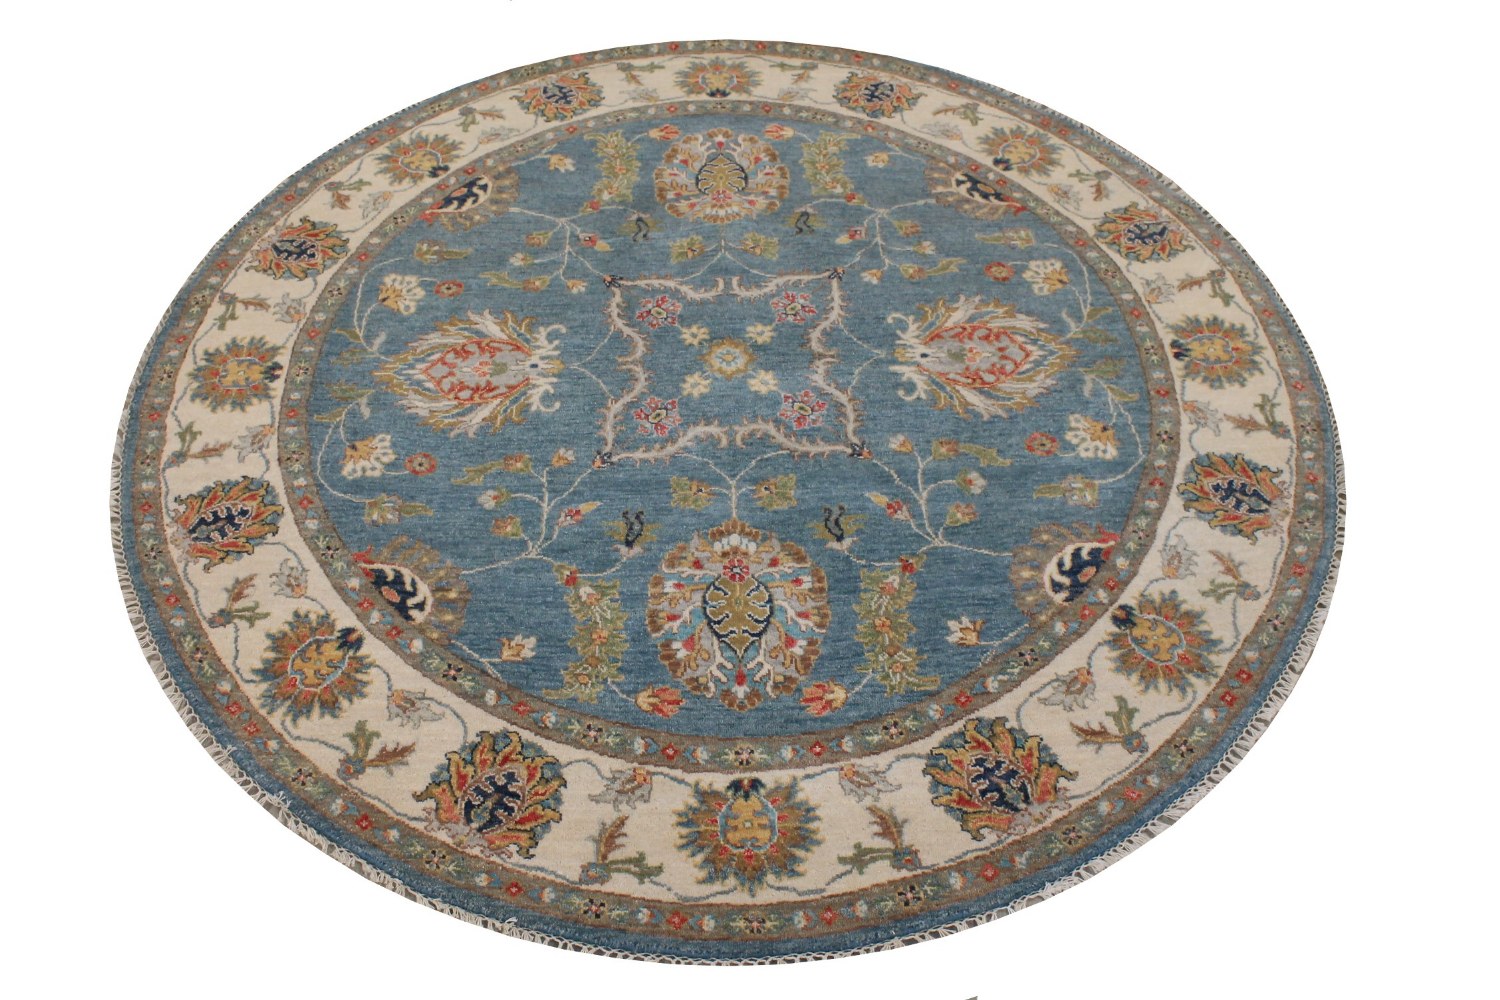 6 ft. - 7 ft. Round & Square Traditional Hand Knotted Wool Area Rug - MR028750